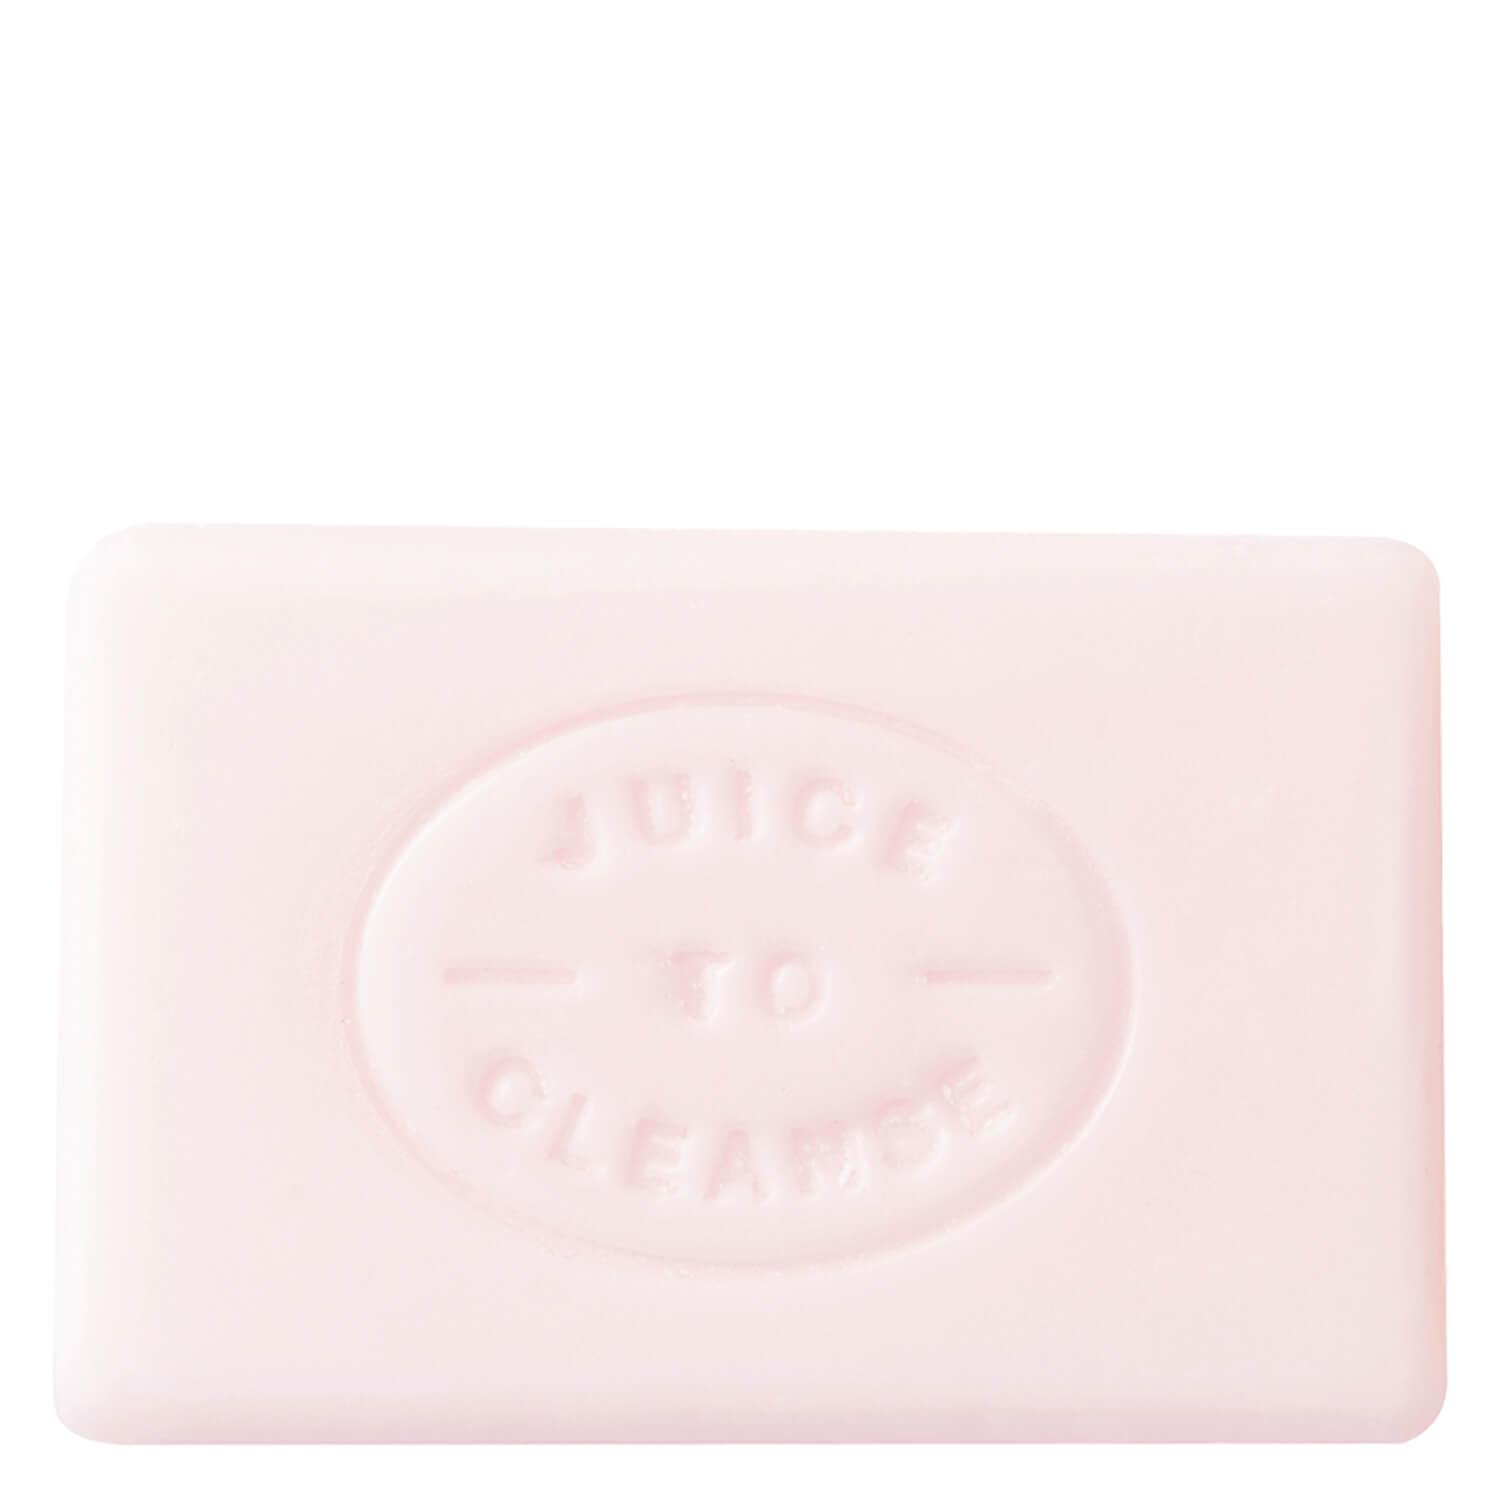 Juice to Cleanse - Clean Butter Hair Pack Bar